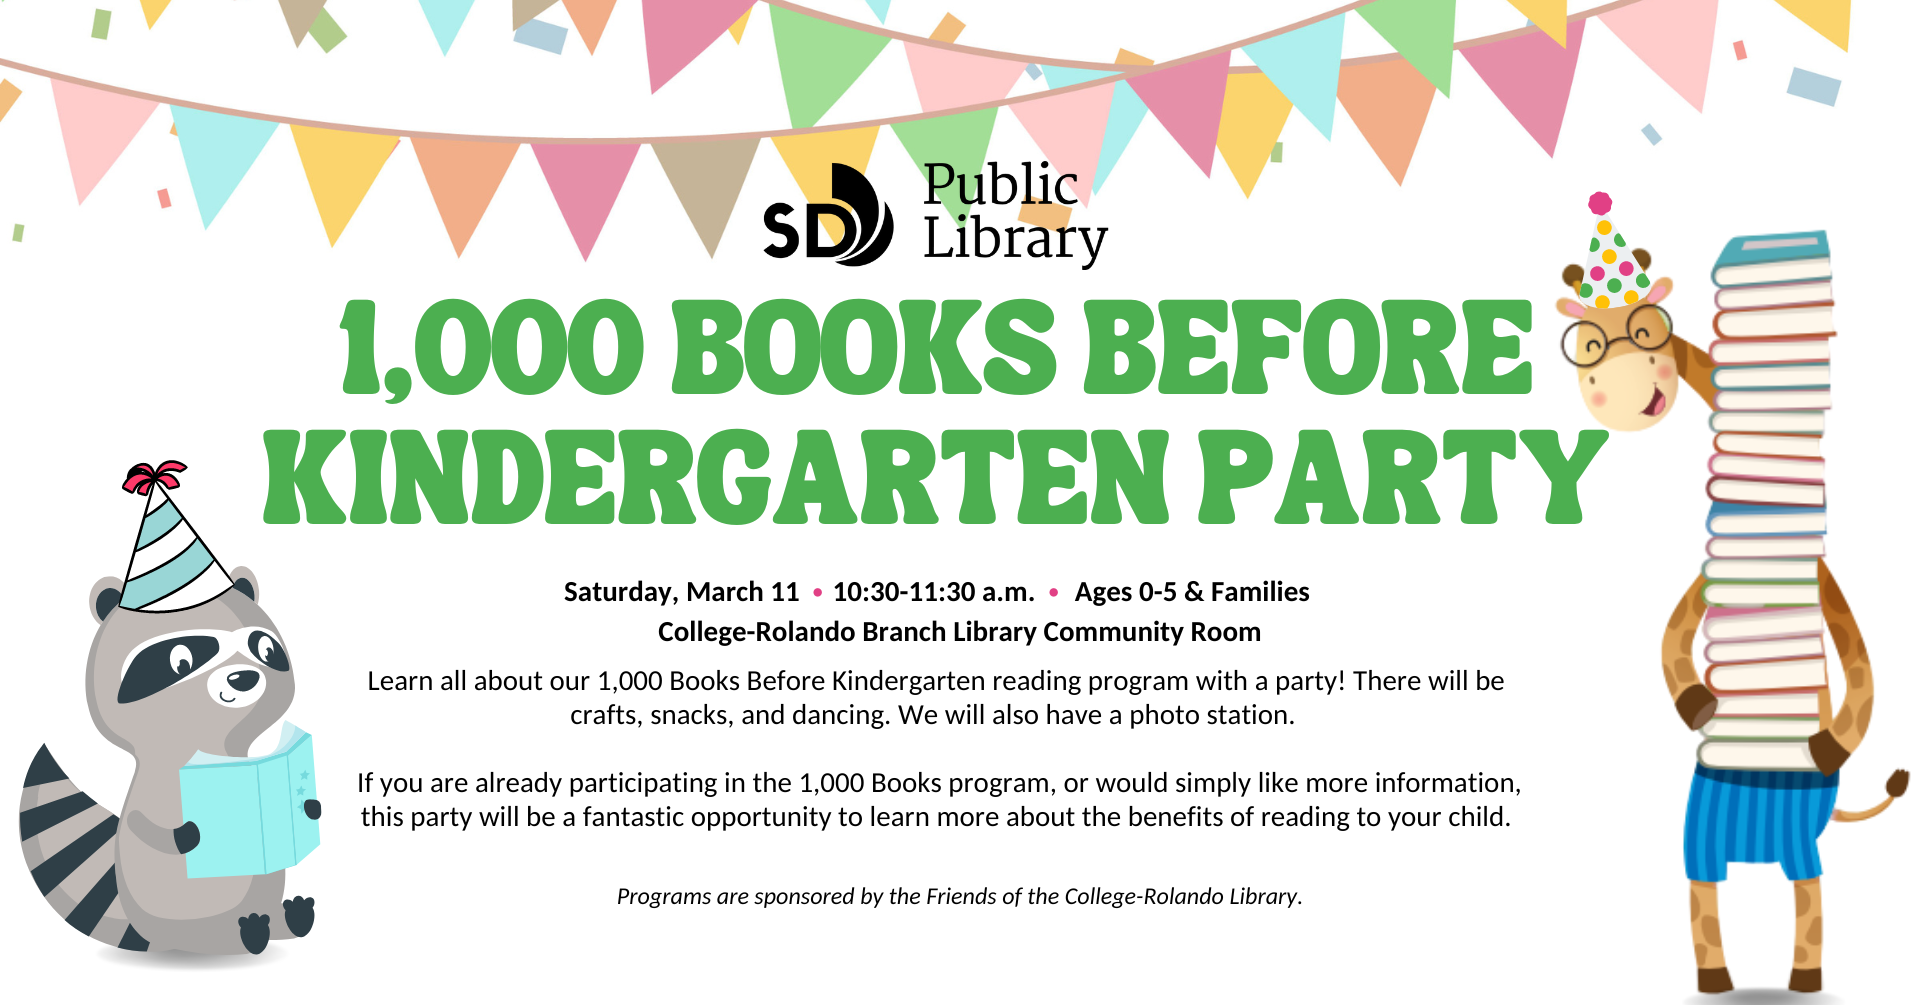 Learn all about our 1,000 Books Before Kindergarten reading program with a party! There will be crafts, snacks, and dancing. We will also have a photo station.    If you are already participating in the 1,000 Books program, or would simply like more information, this party will be a fantastic opportunity to learn more about the benefits of reading to your child.